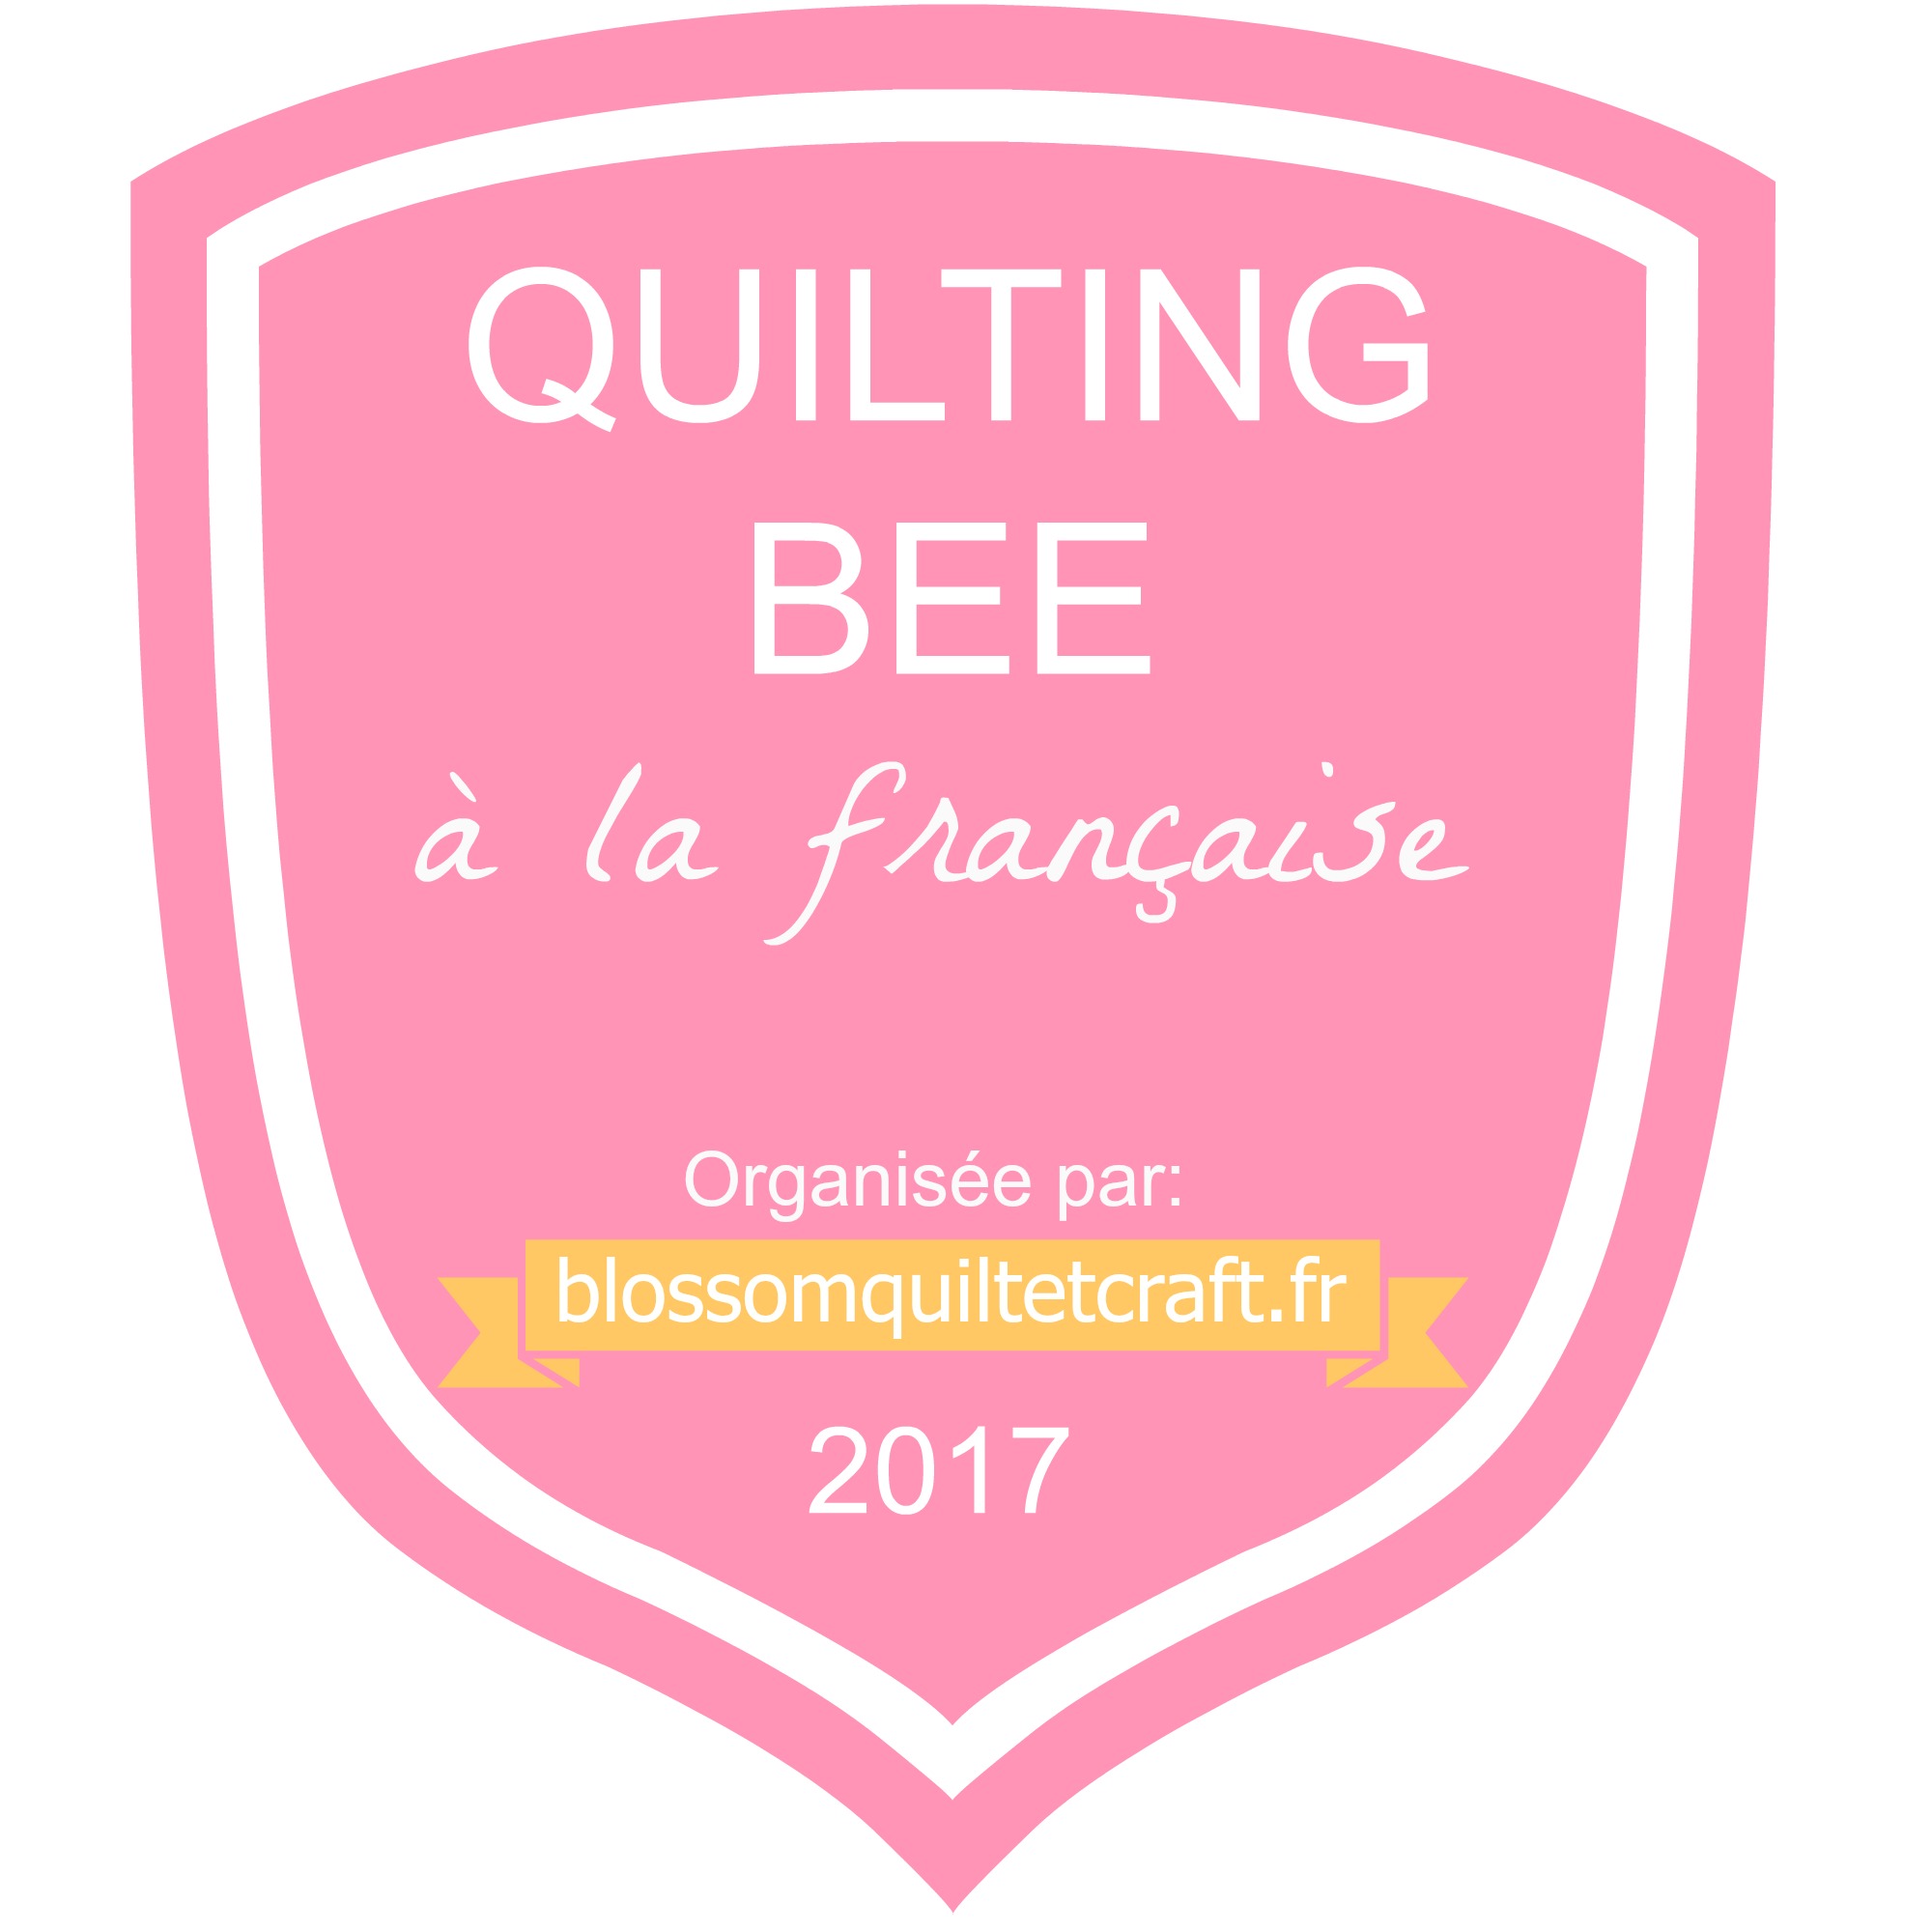 Quilting BEE France 2017